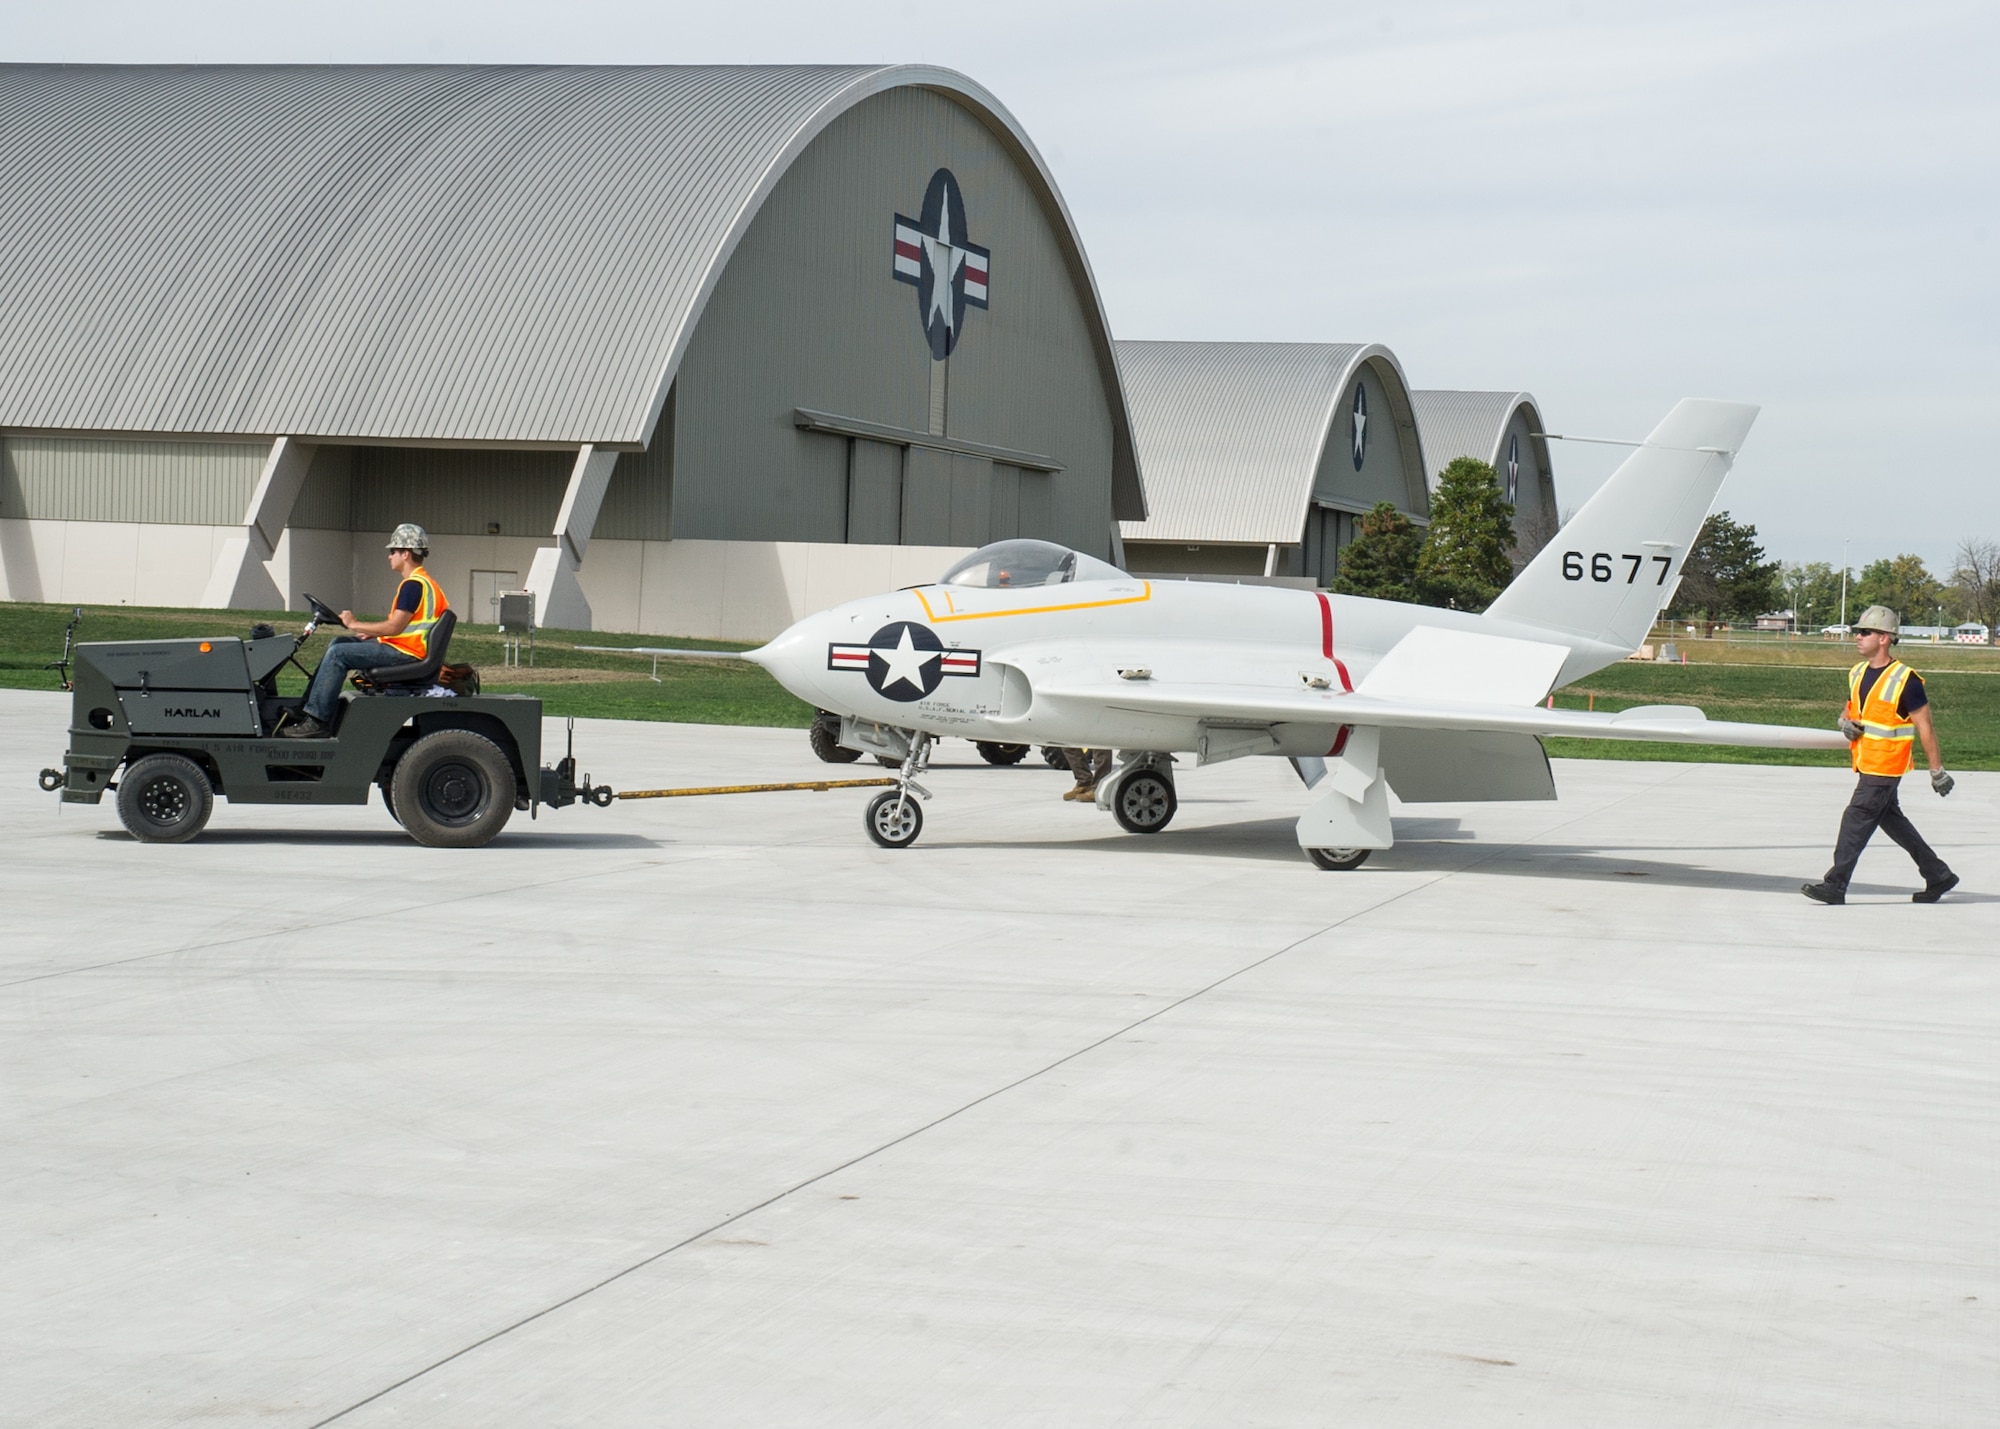 Restoration staff move the Northrop X-4 into the new fourth building at the National Museum of the U.S. Air Force on Oct. 6, 2015. (U.S. Air Force photo by Ken LaRock)